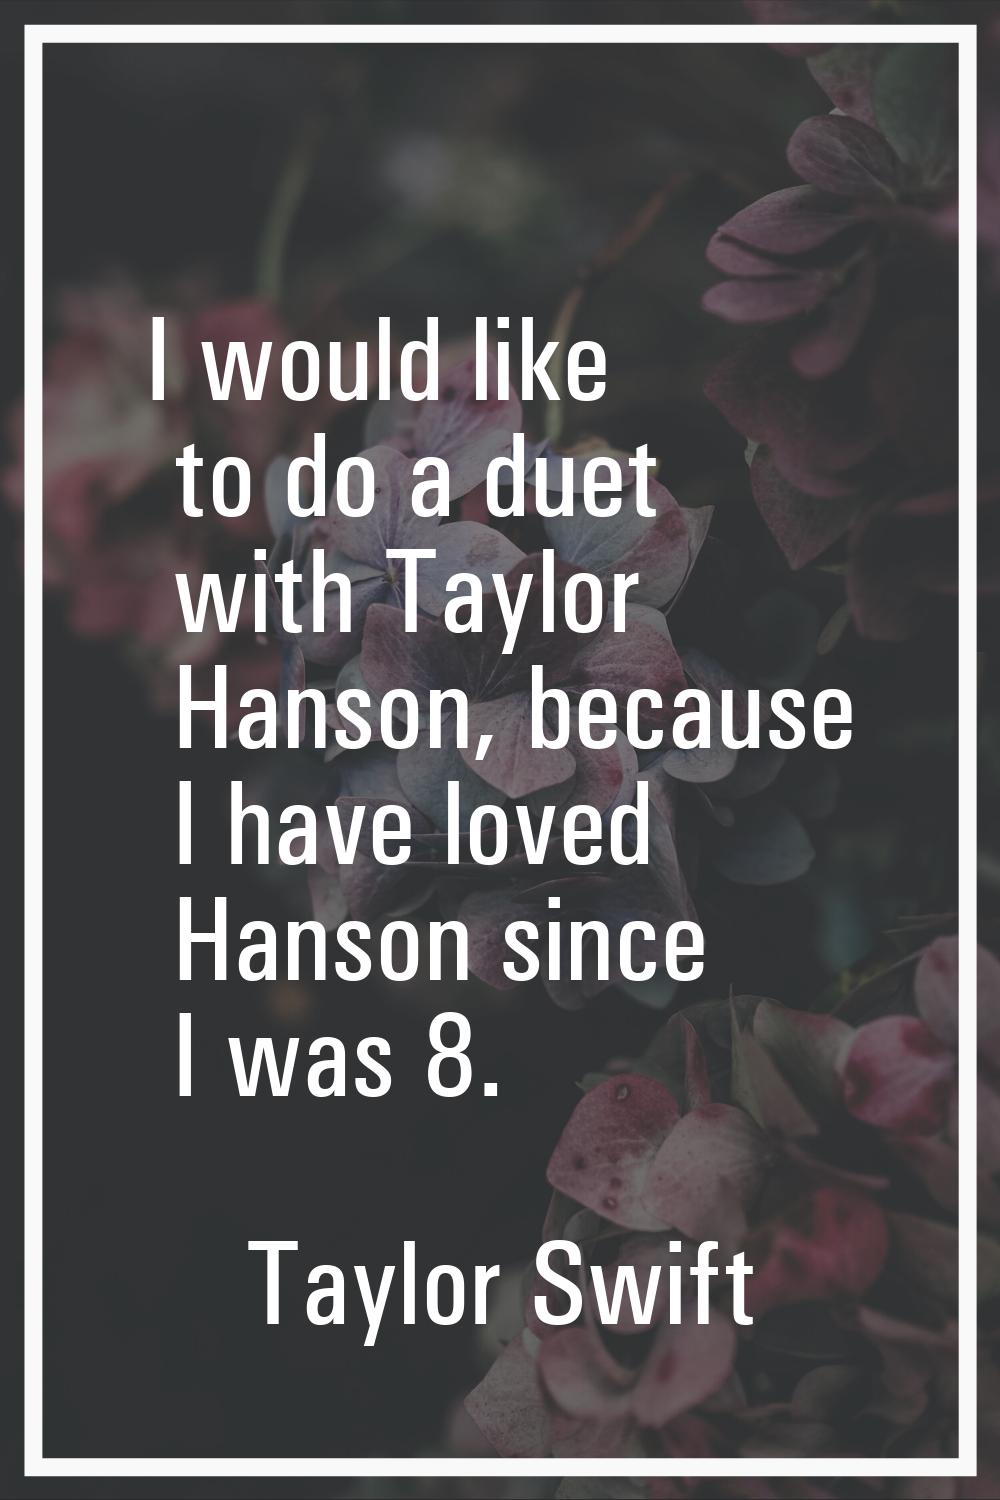 I would like to do a duet with Taylor Hanson, because I have loved Hanson since I was 8.